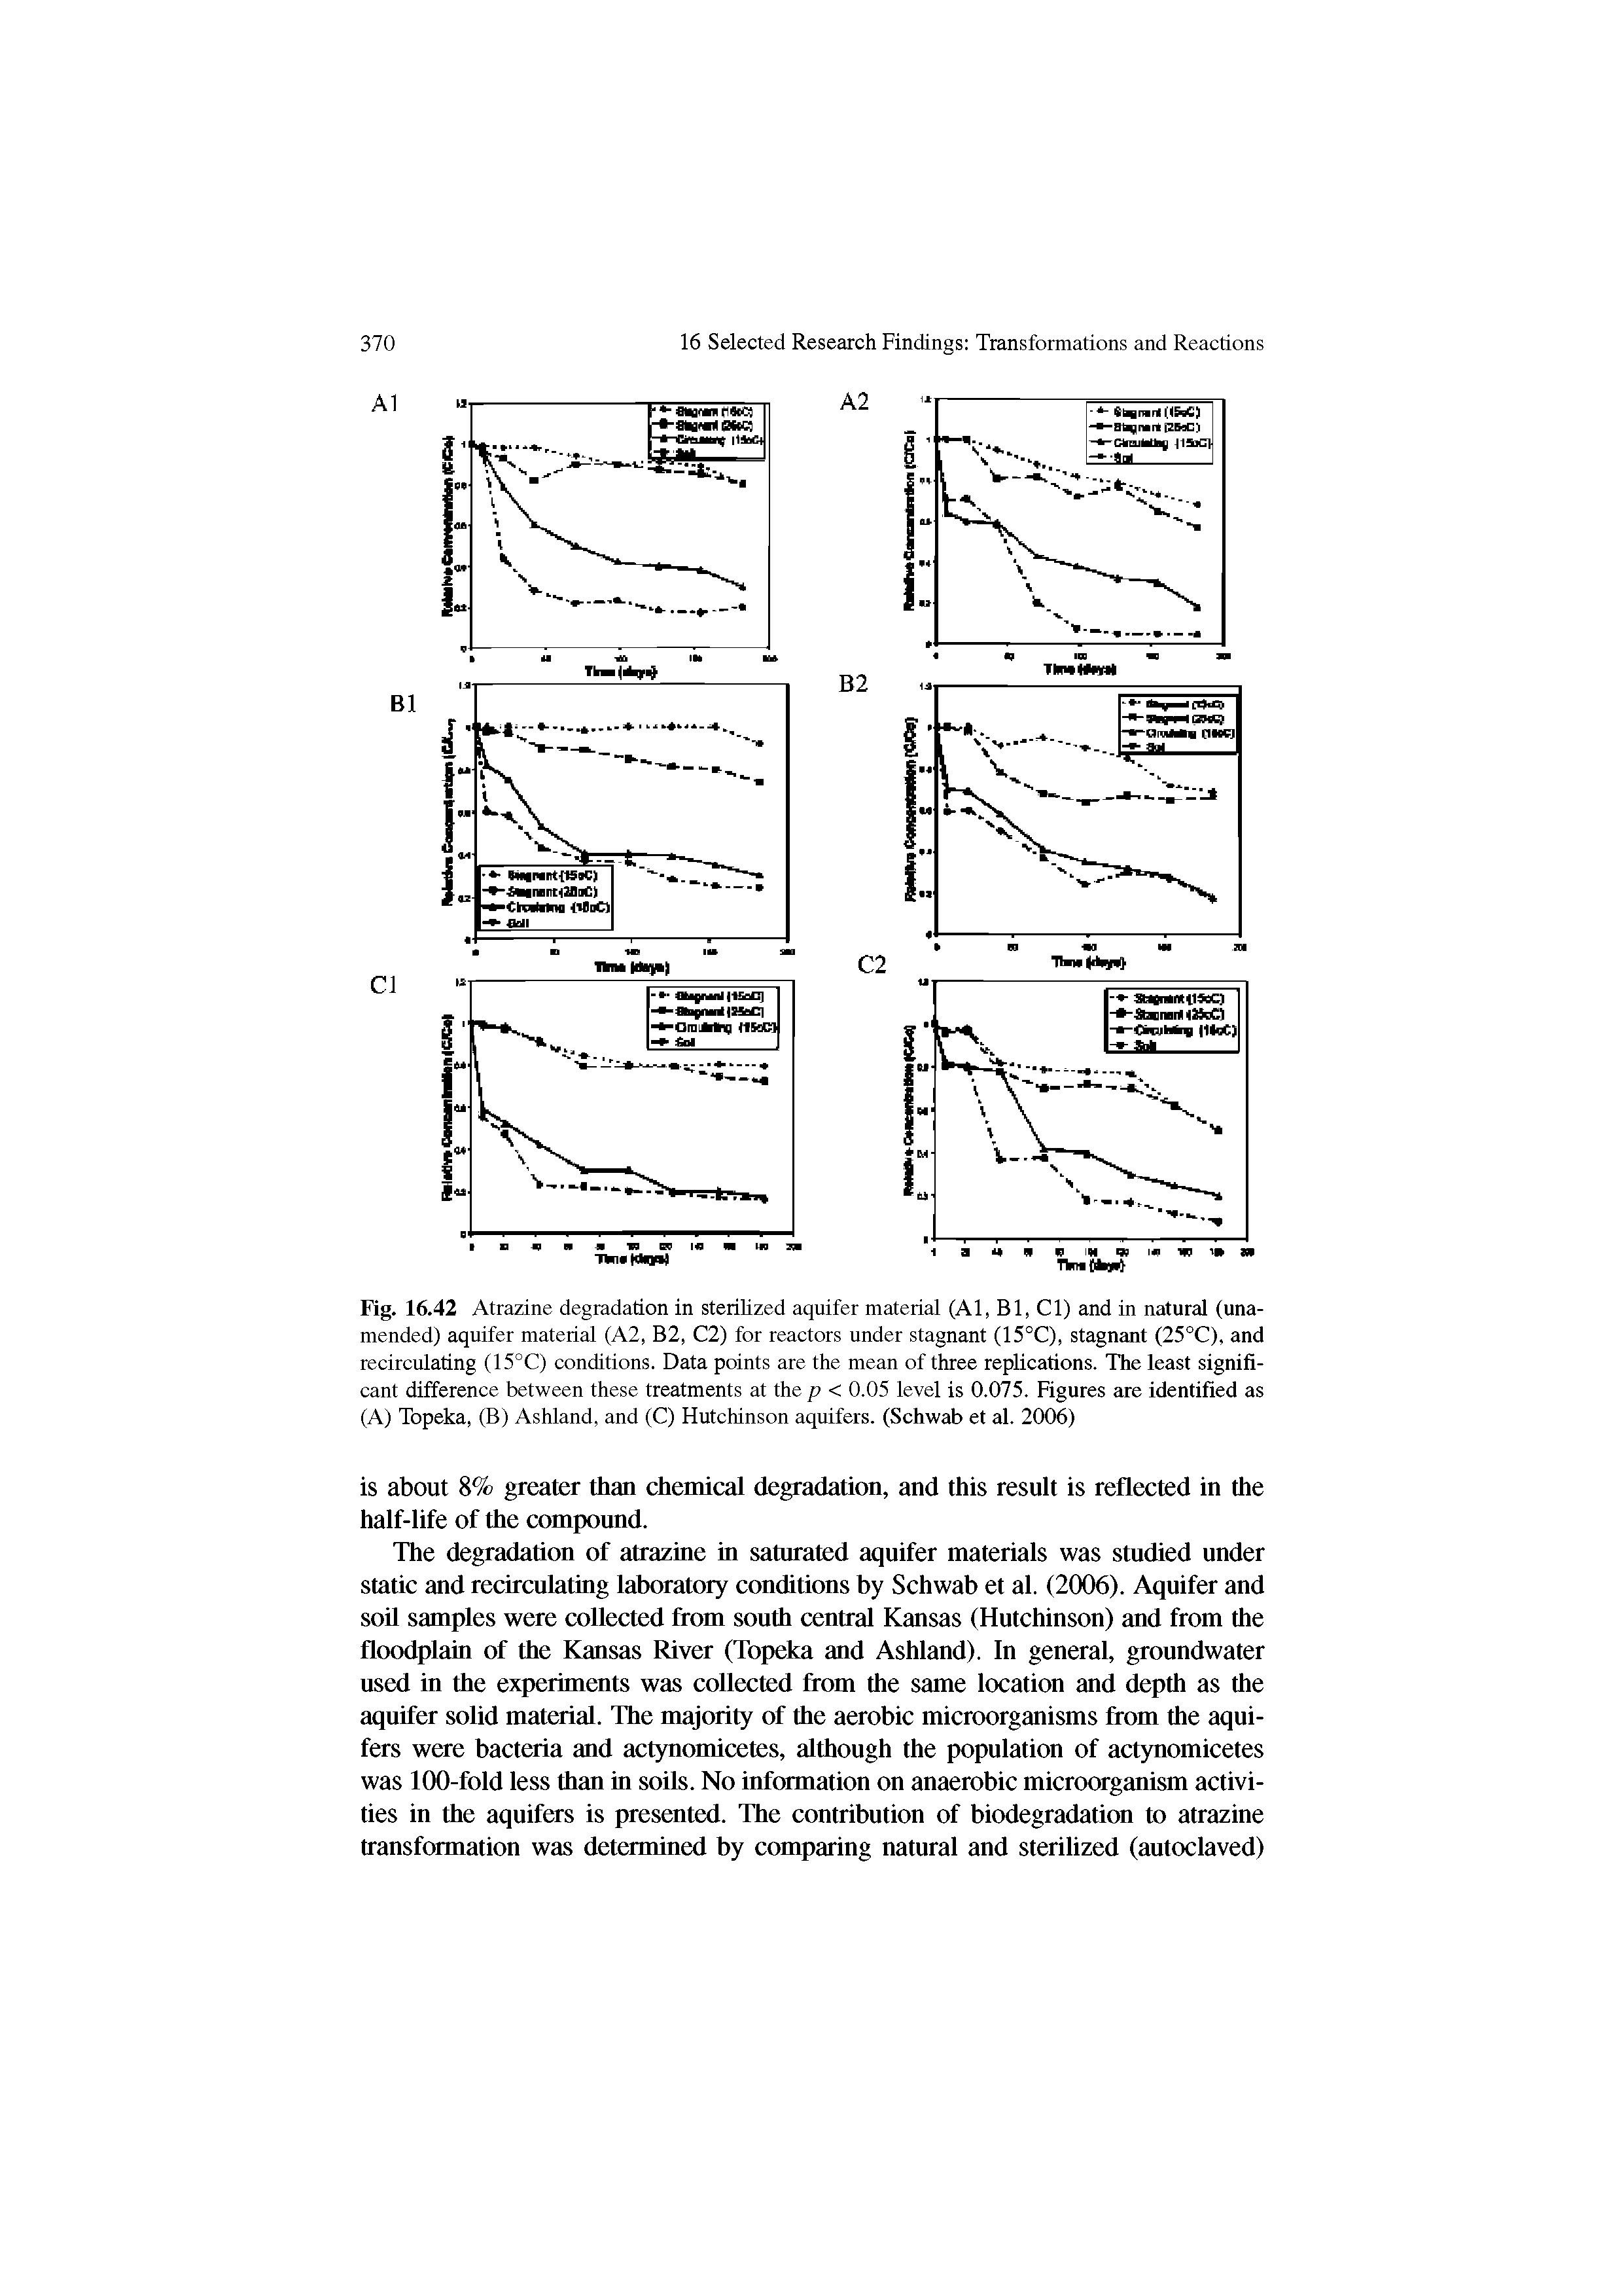 Fig. 16.42 Atrazine degradation in sterilized aquifer material (Al, Bl, Cl) and in natural (unamended) aquifer material (A2, B2, C2) for reactors under stagnant (15°C), stagnant (25°C), and recirculating (15°C) conditions. Data points are the mean of three replications. The least significant difference between these treatments at the p < 0.05 level is 0.075. Figures are identified as (A) Topeka, (B) Ashland, and (C) Hutchinson aquifers. (Schwab et al. 2006)...